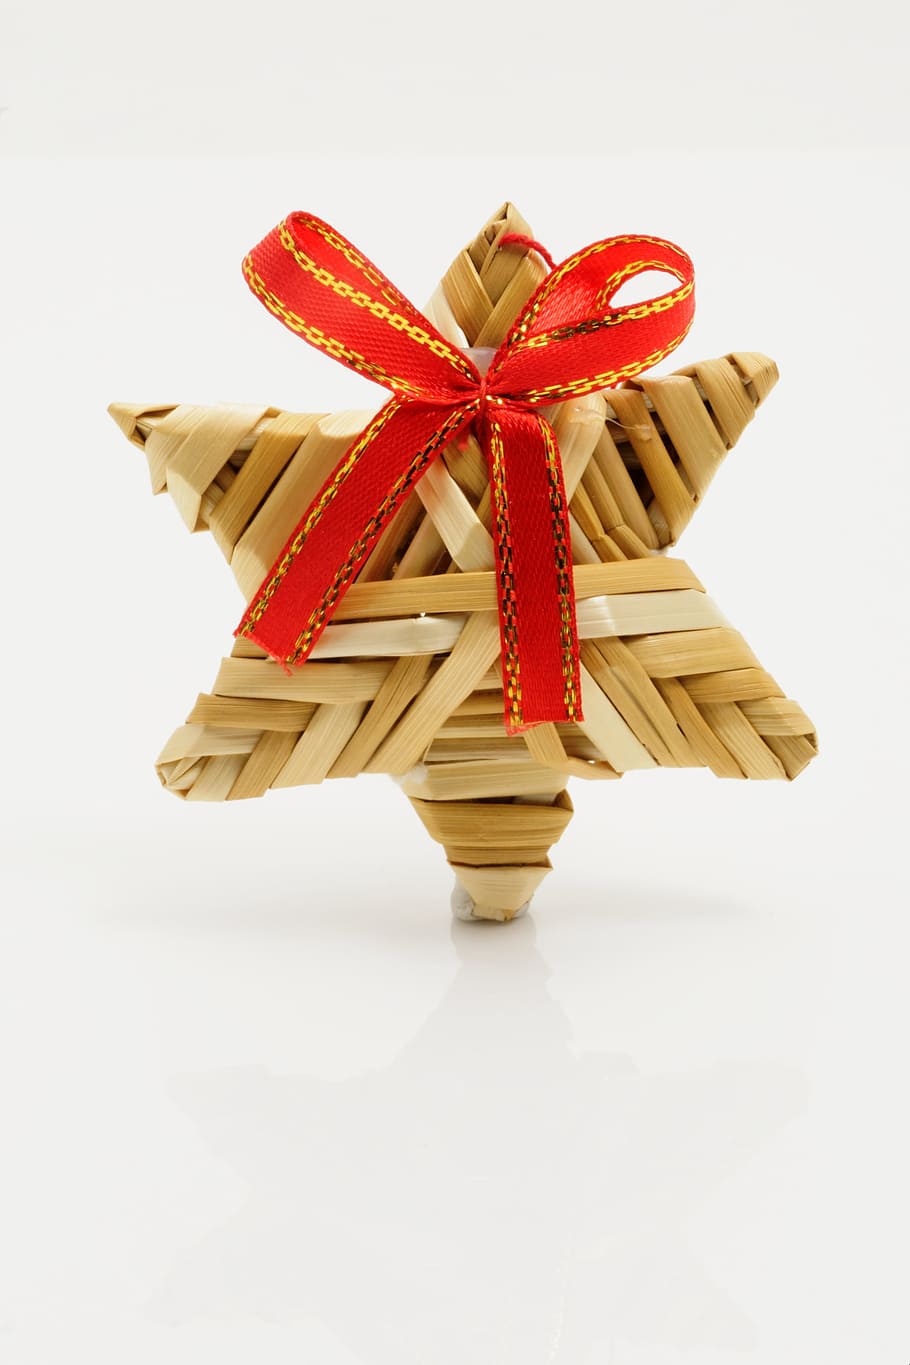 brown star figure, Christmas, Deco, Straw, Advent, decoration, festive decorations, star, tied bow, ribbon - sewing item